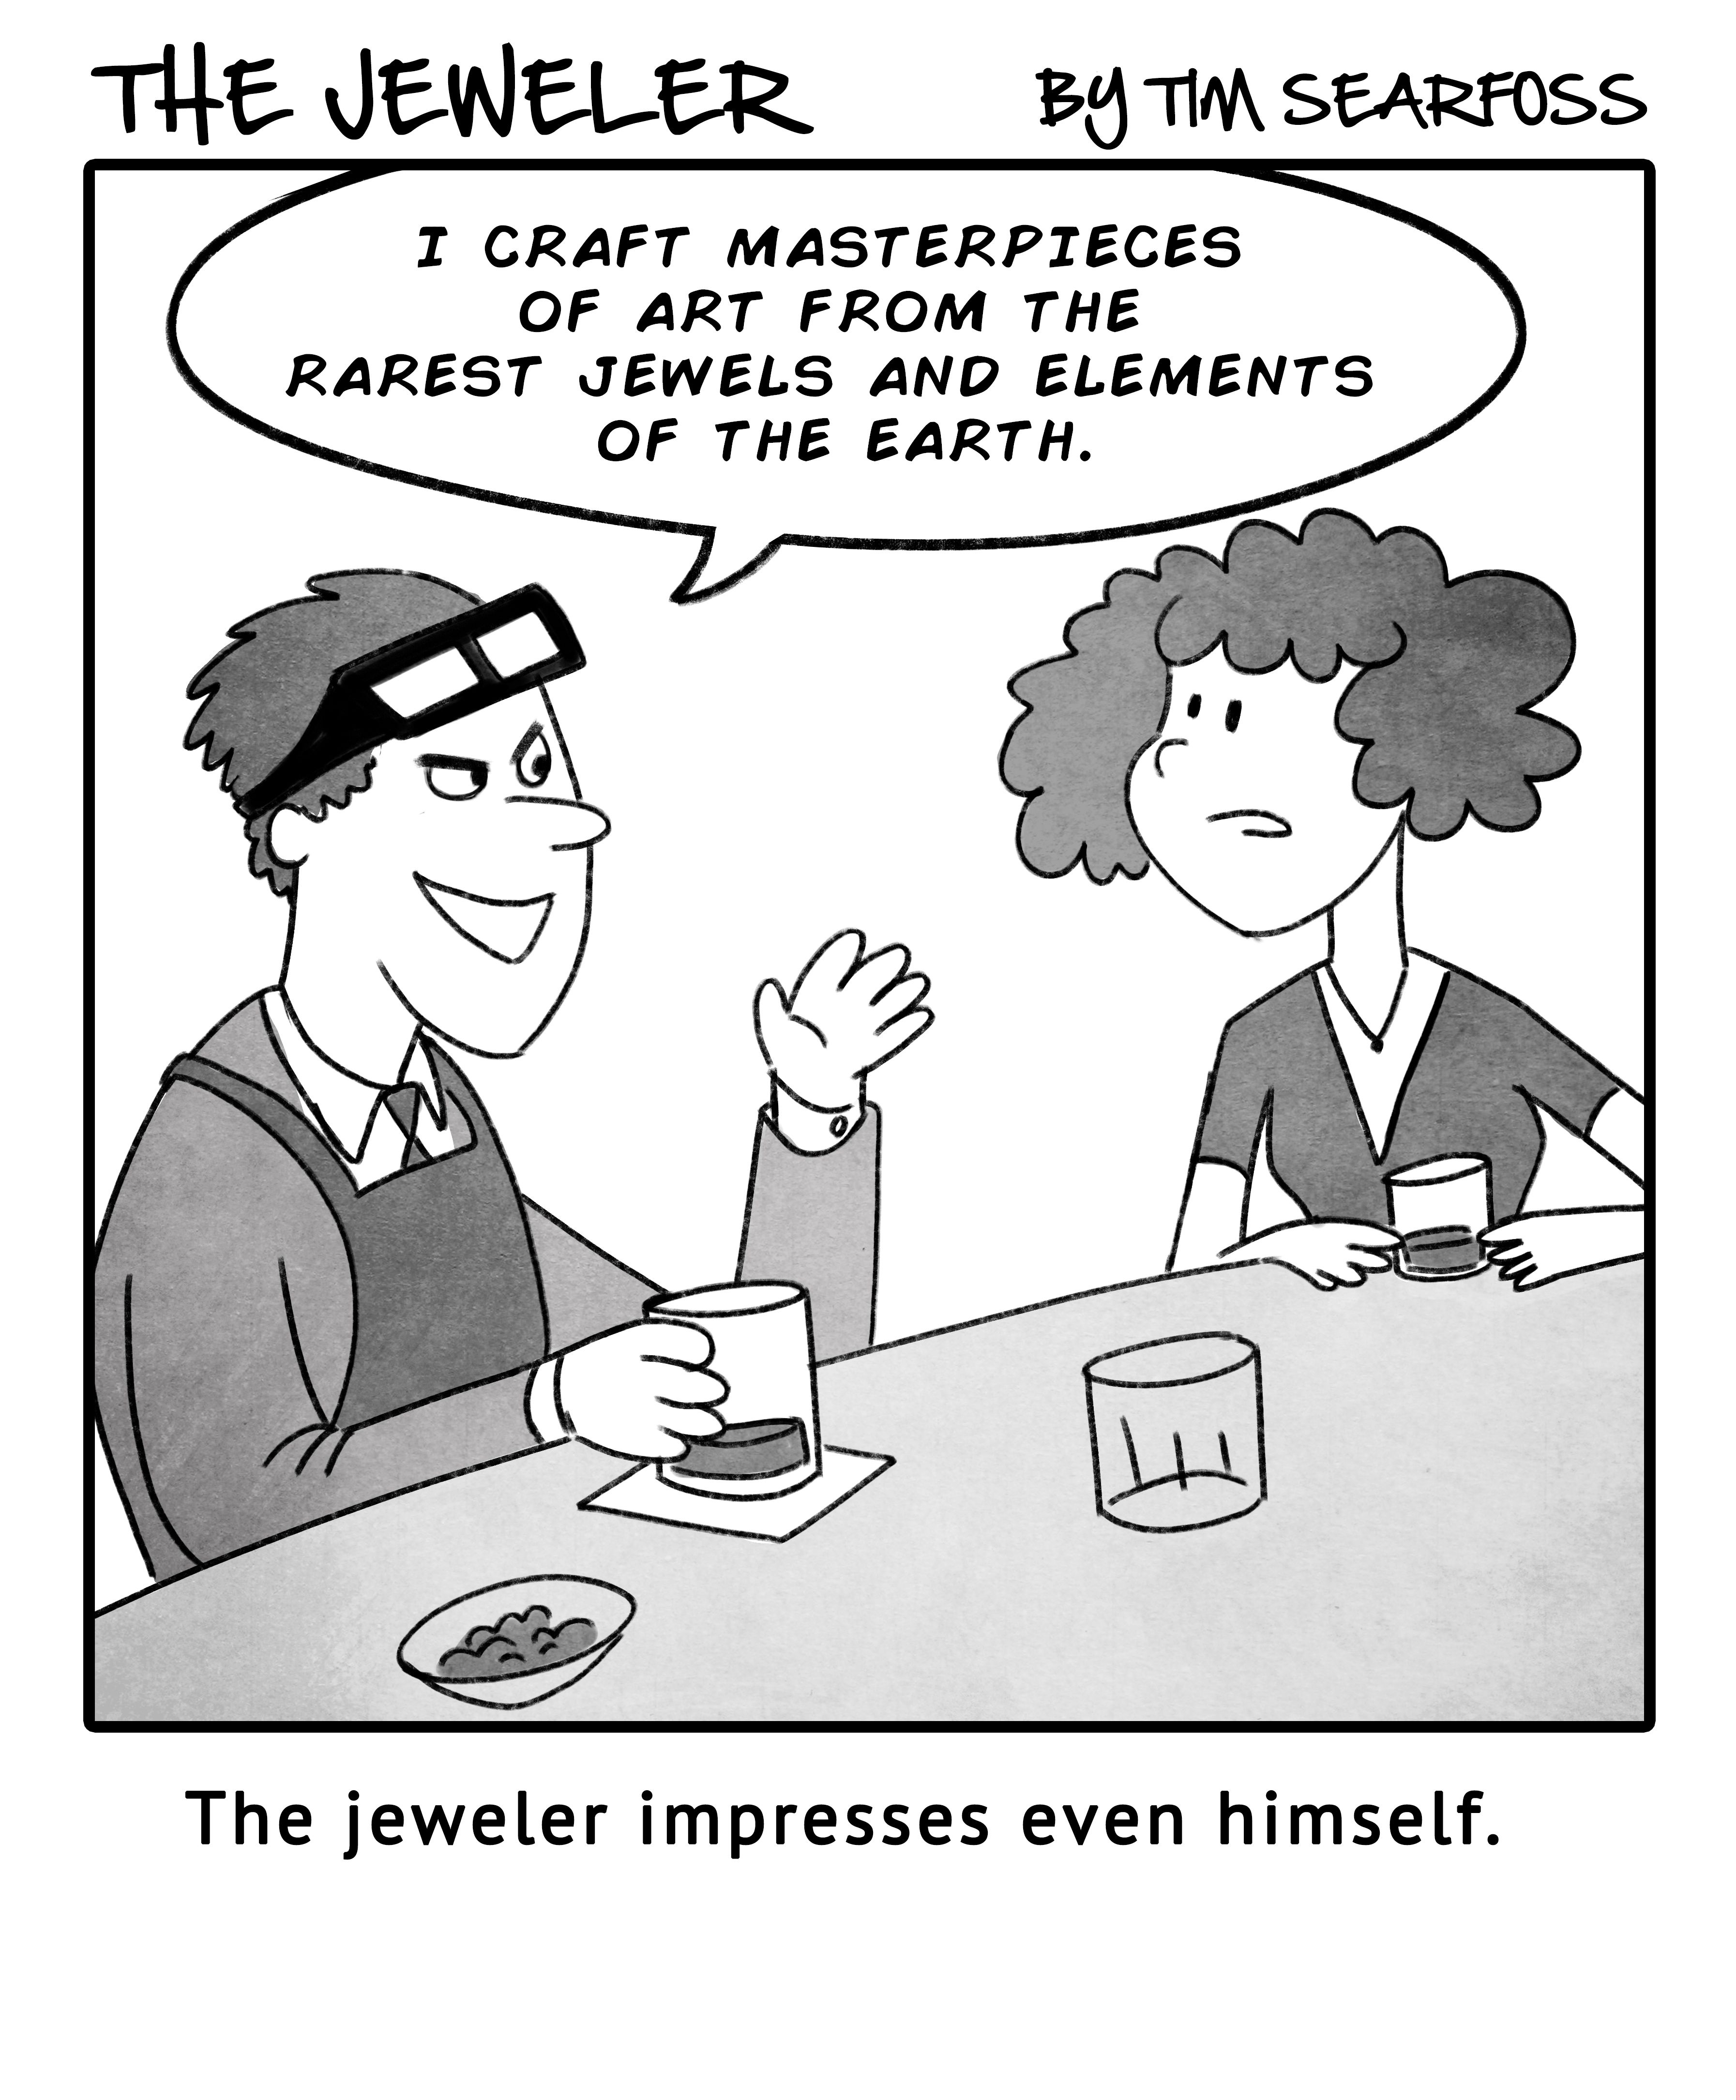 So What If The Jeweler Brags. He Has Every Reason!